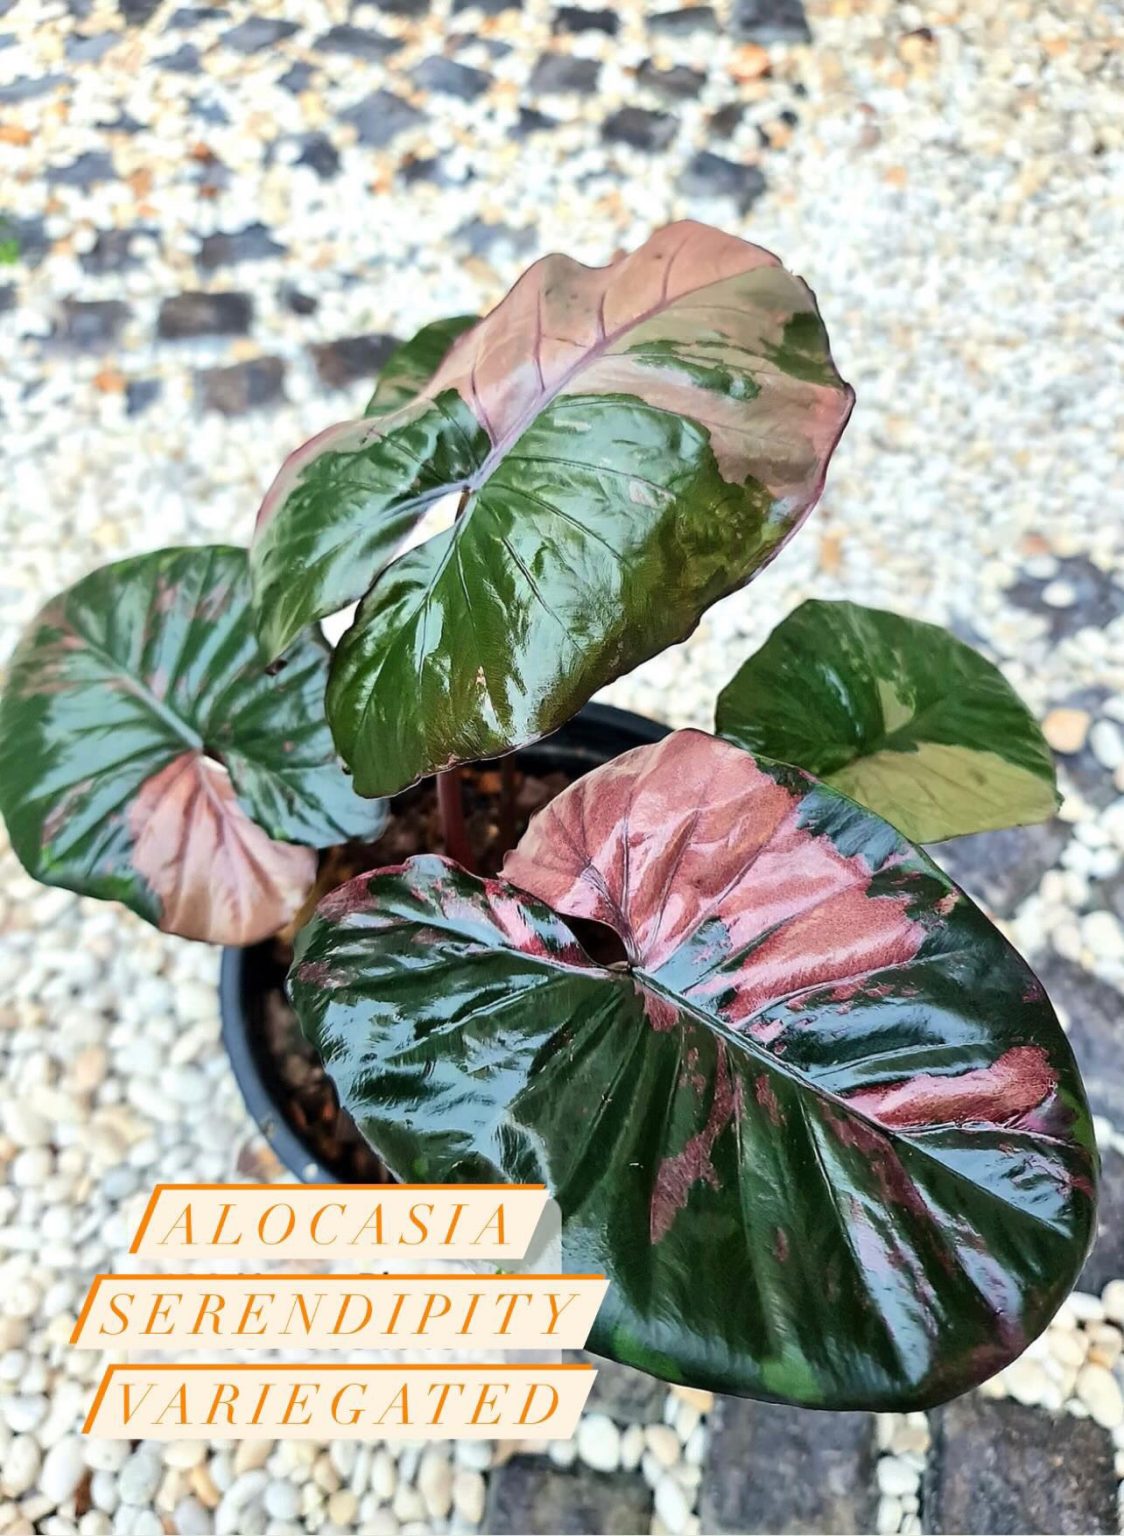 Buy Alocasia Serendipity Variegated 6 Pot from Thailand - Limited Stock